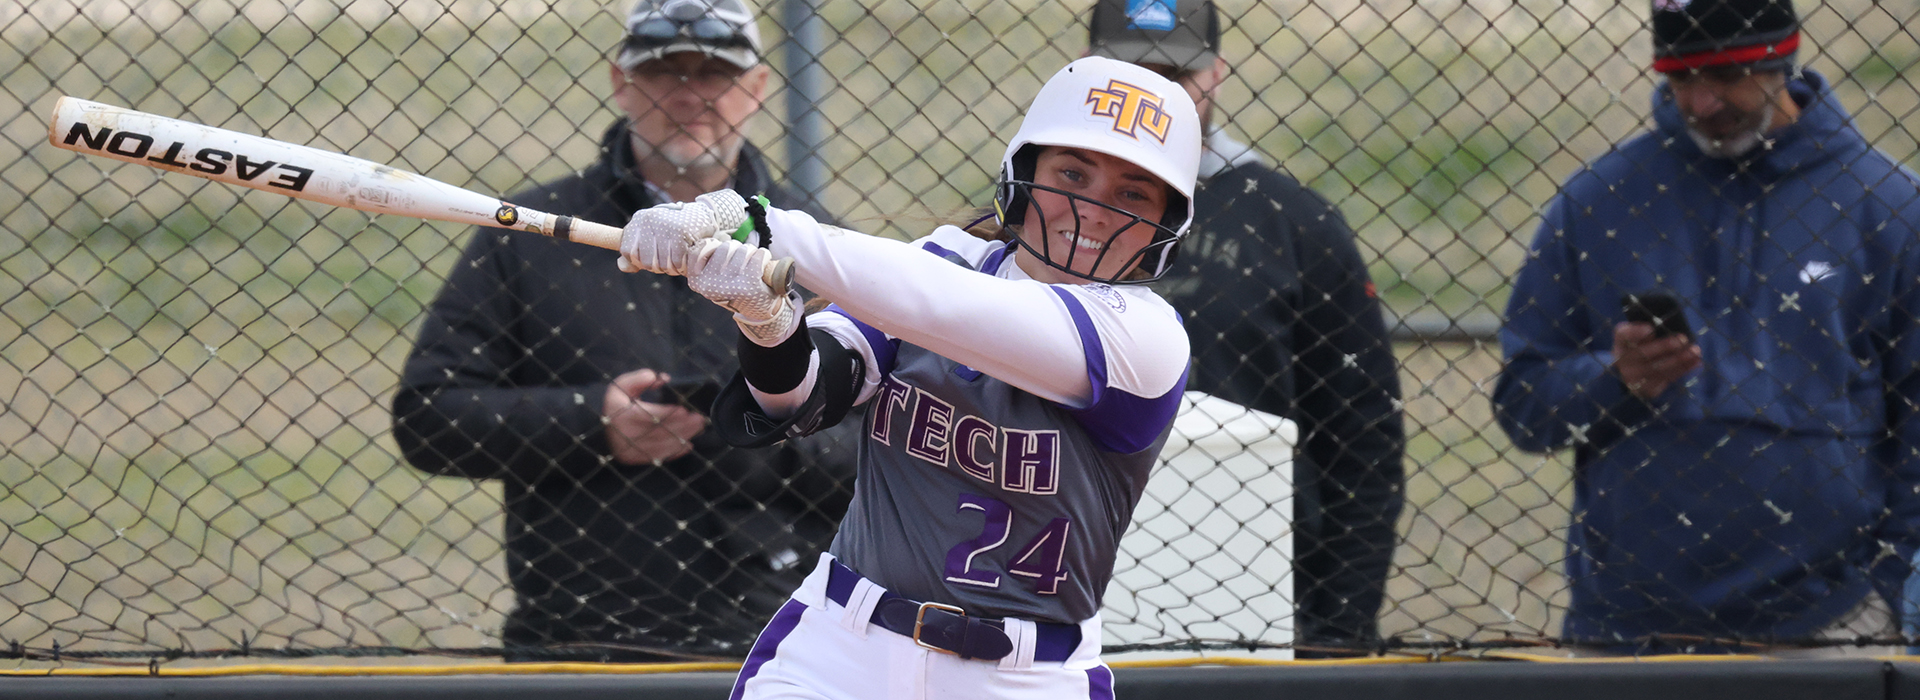 Golden Eagle softball closes out Tennessee Tech Tournament